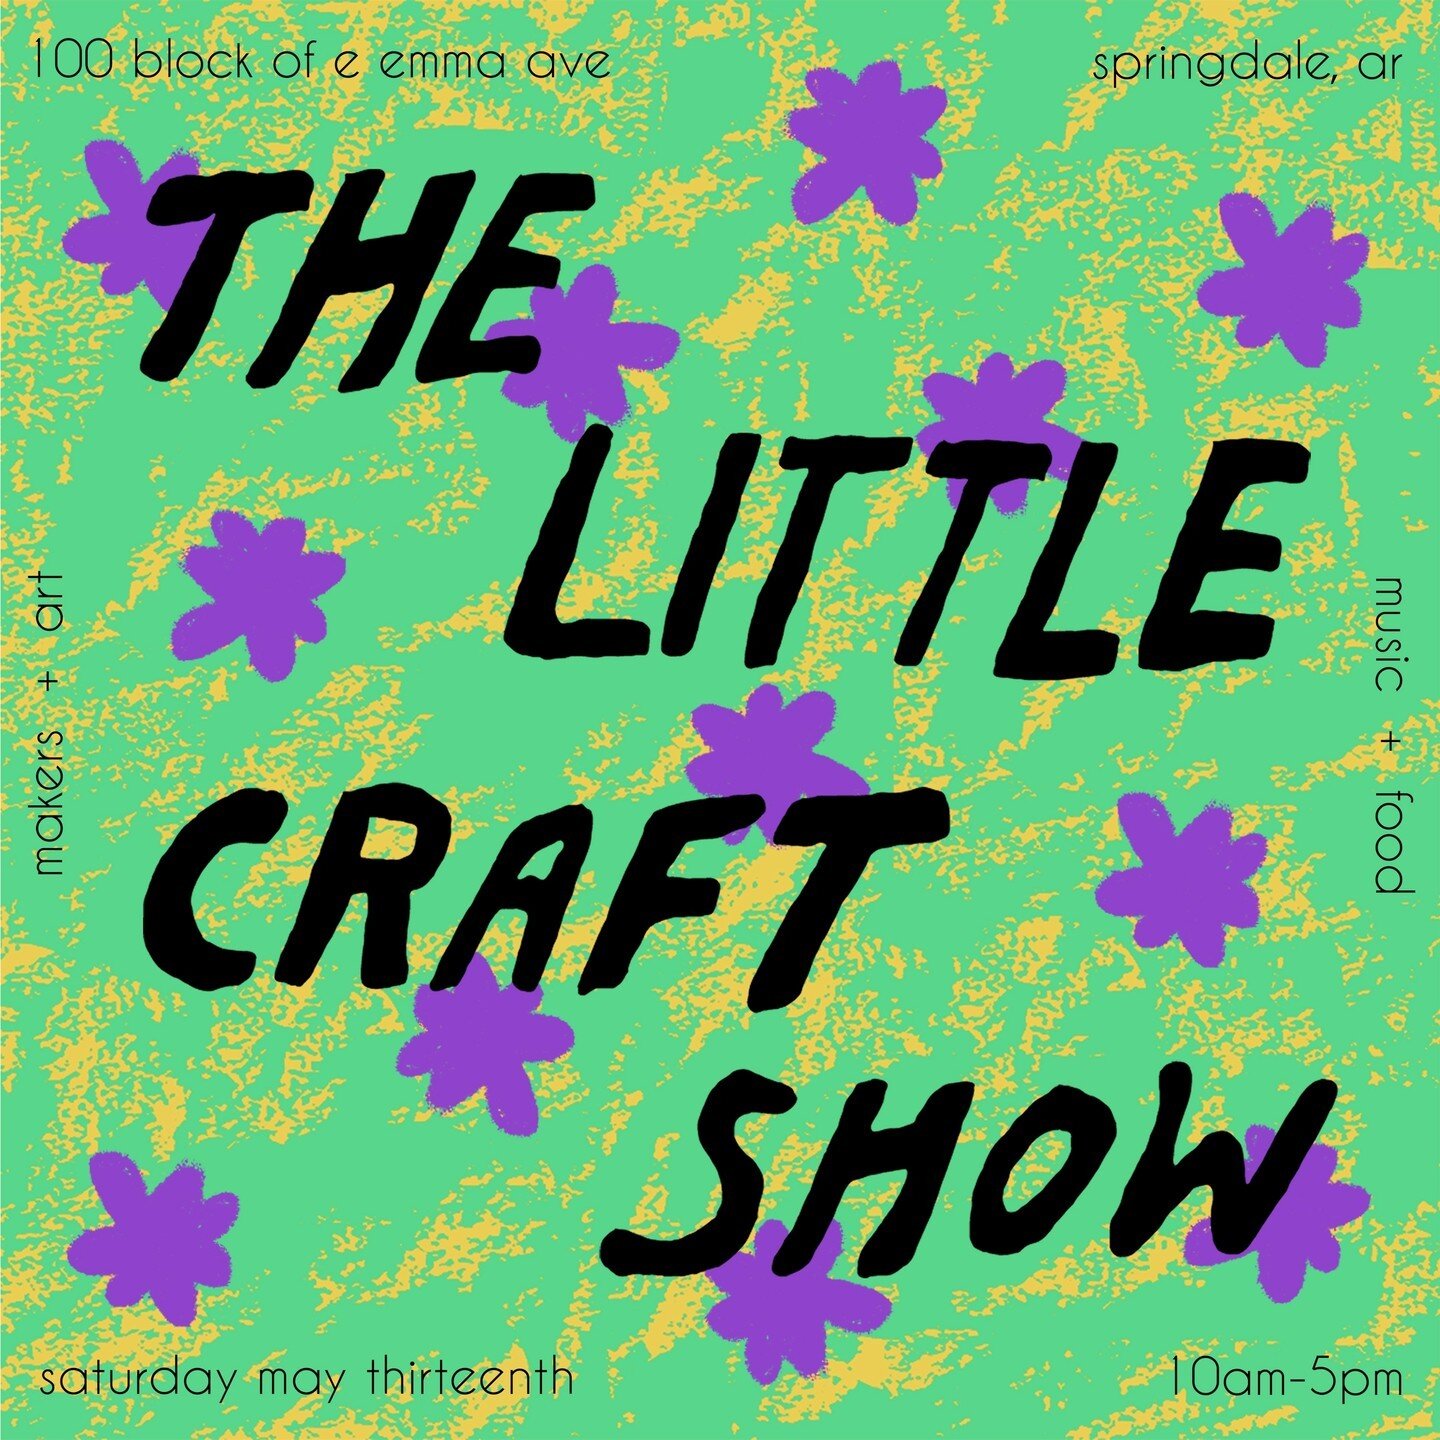 Our Spring show is May 13th, just in time for Mother's Day 🌸 ⁠
Mark your calendars! ⁠
⁠
*Vendors, applications are open through March 20th!⁠
⁠
#thelittlecraftshow⁠
#downtownspringdale⁠
#explorespringdale